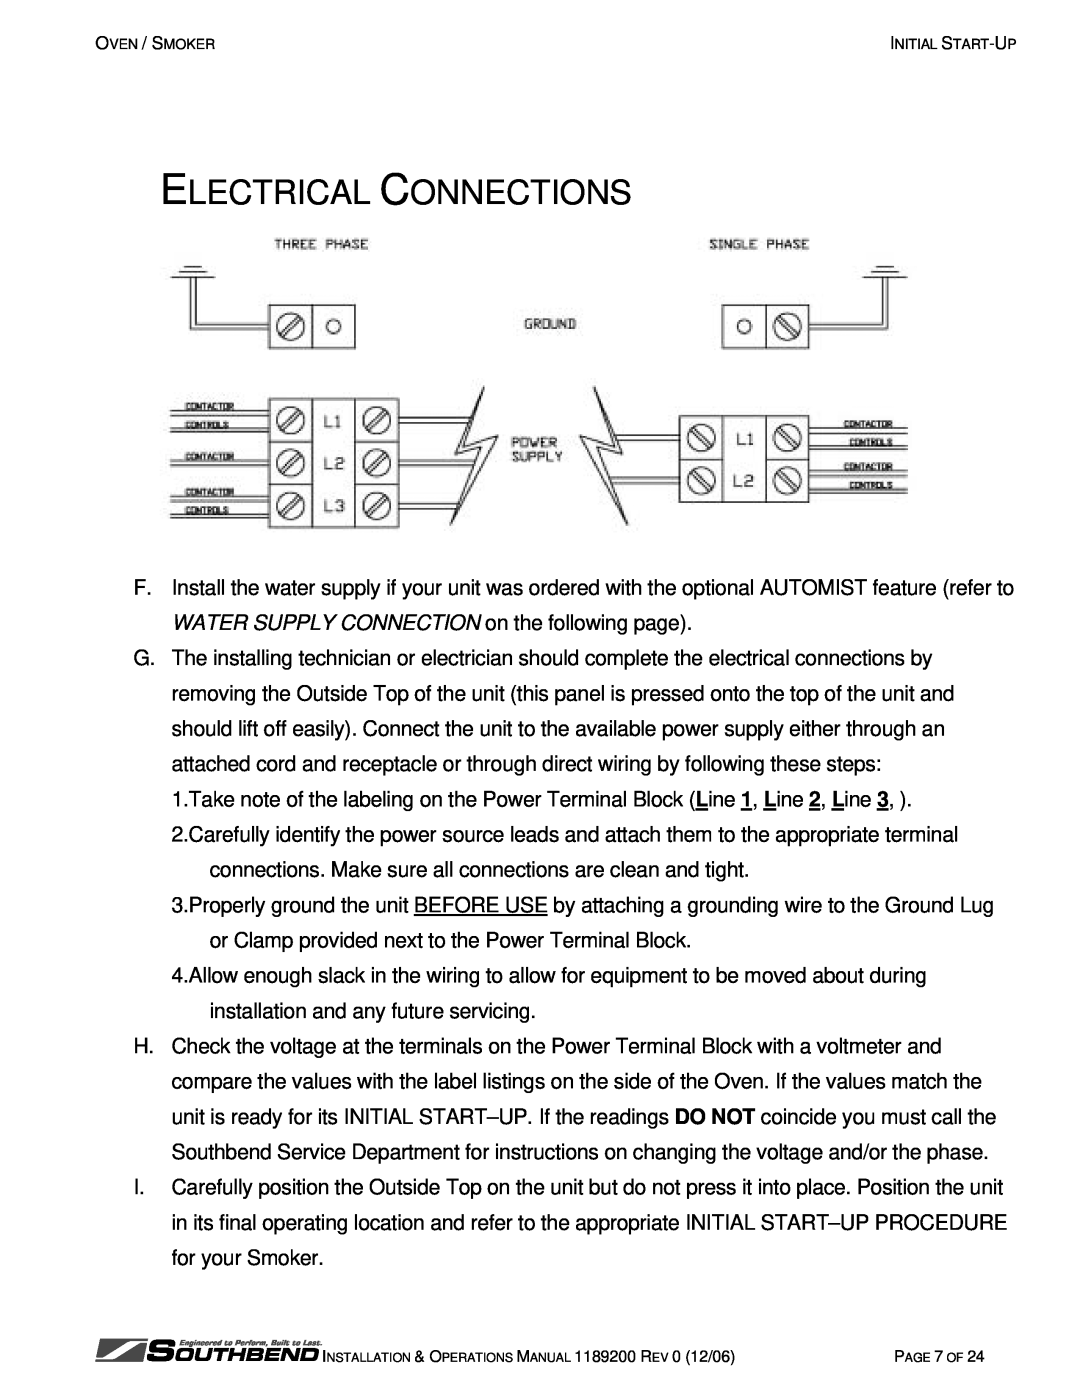 Southbend SB-5-ES, SB-10-ES manual Electrical Connections 